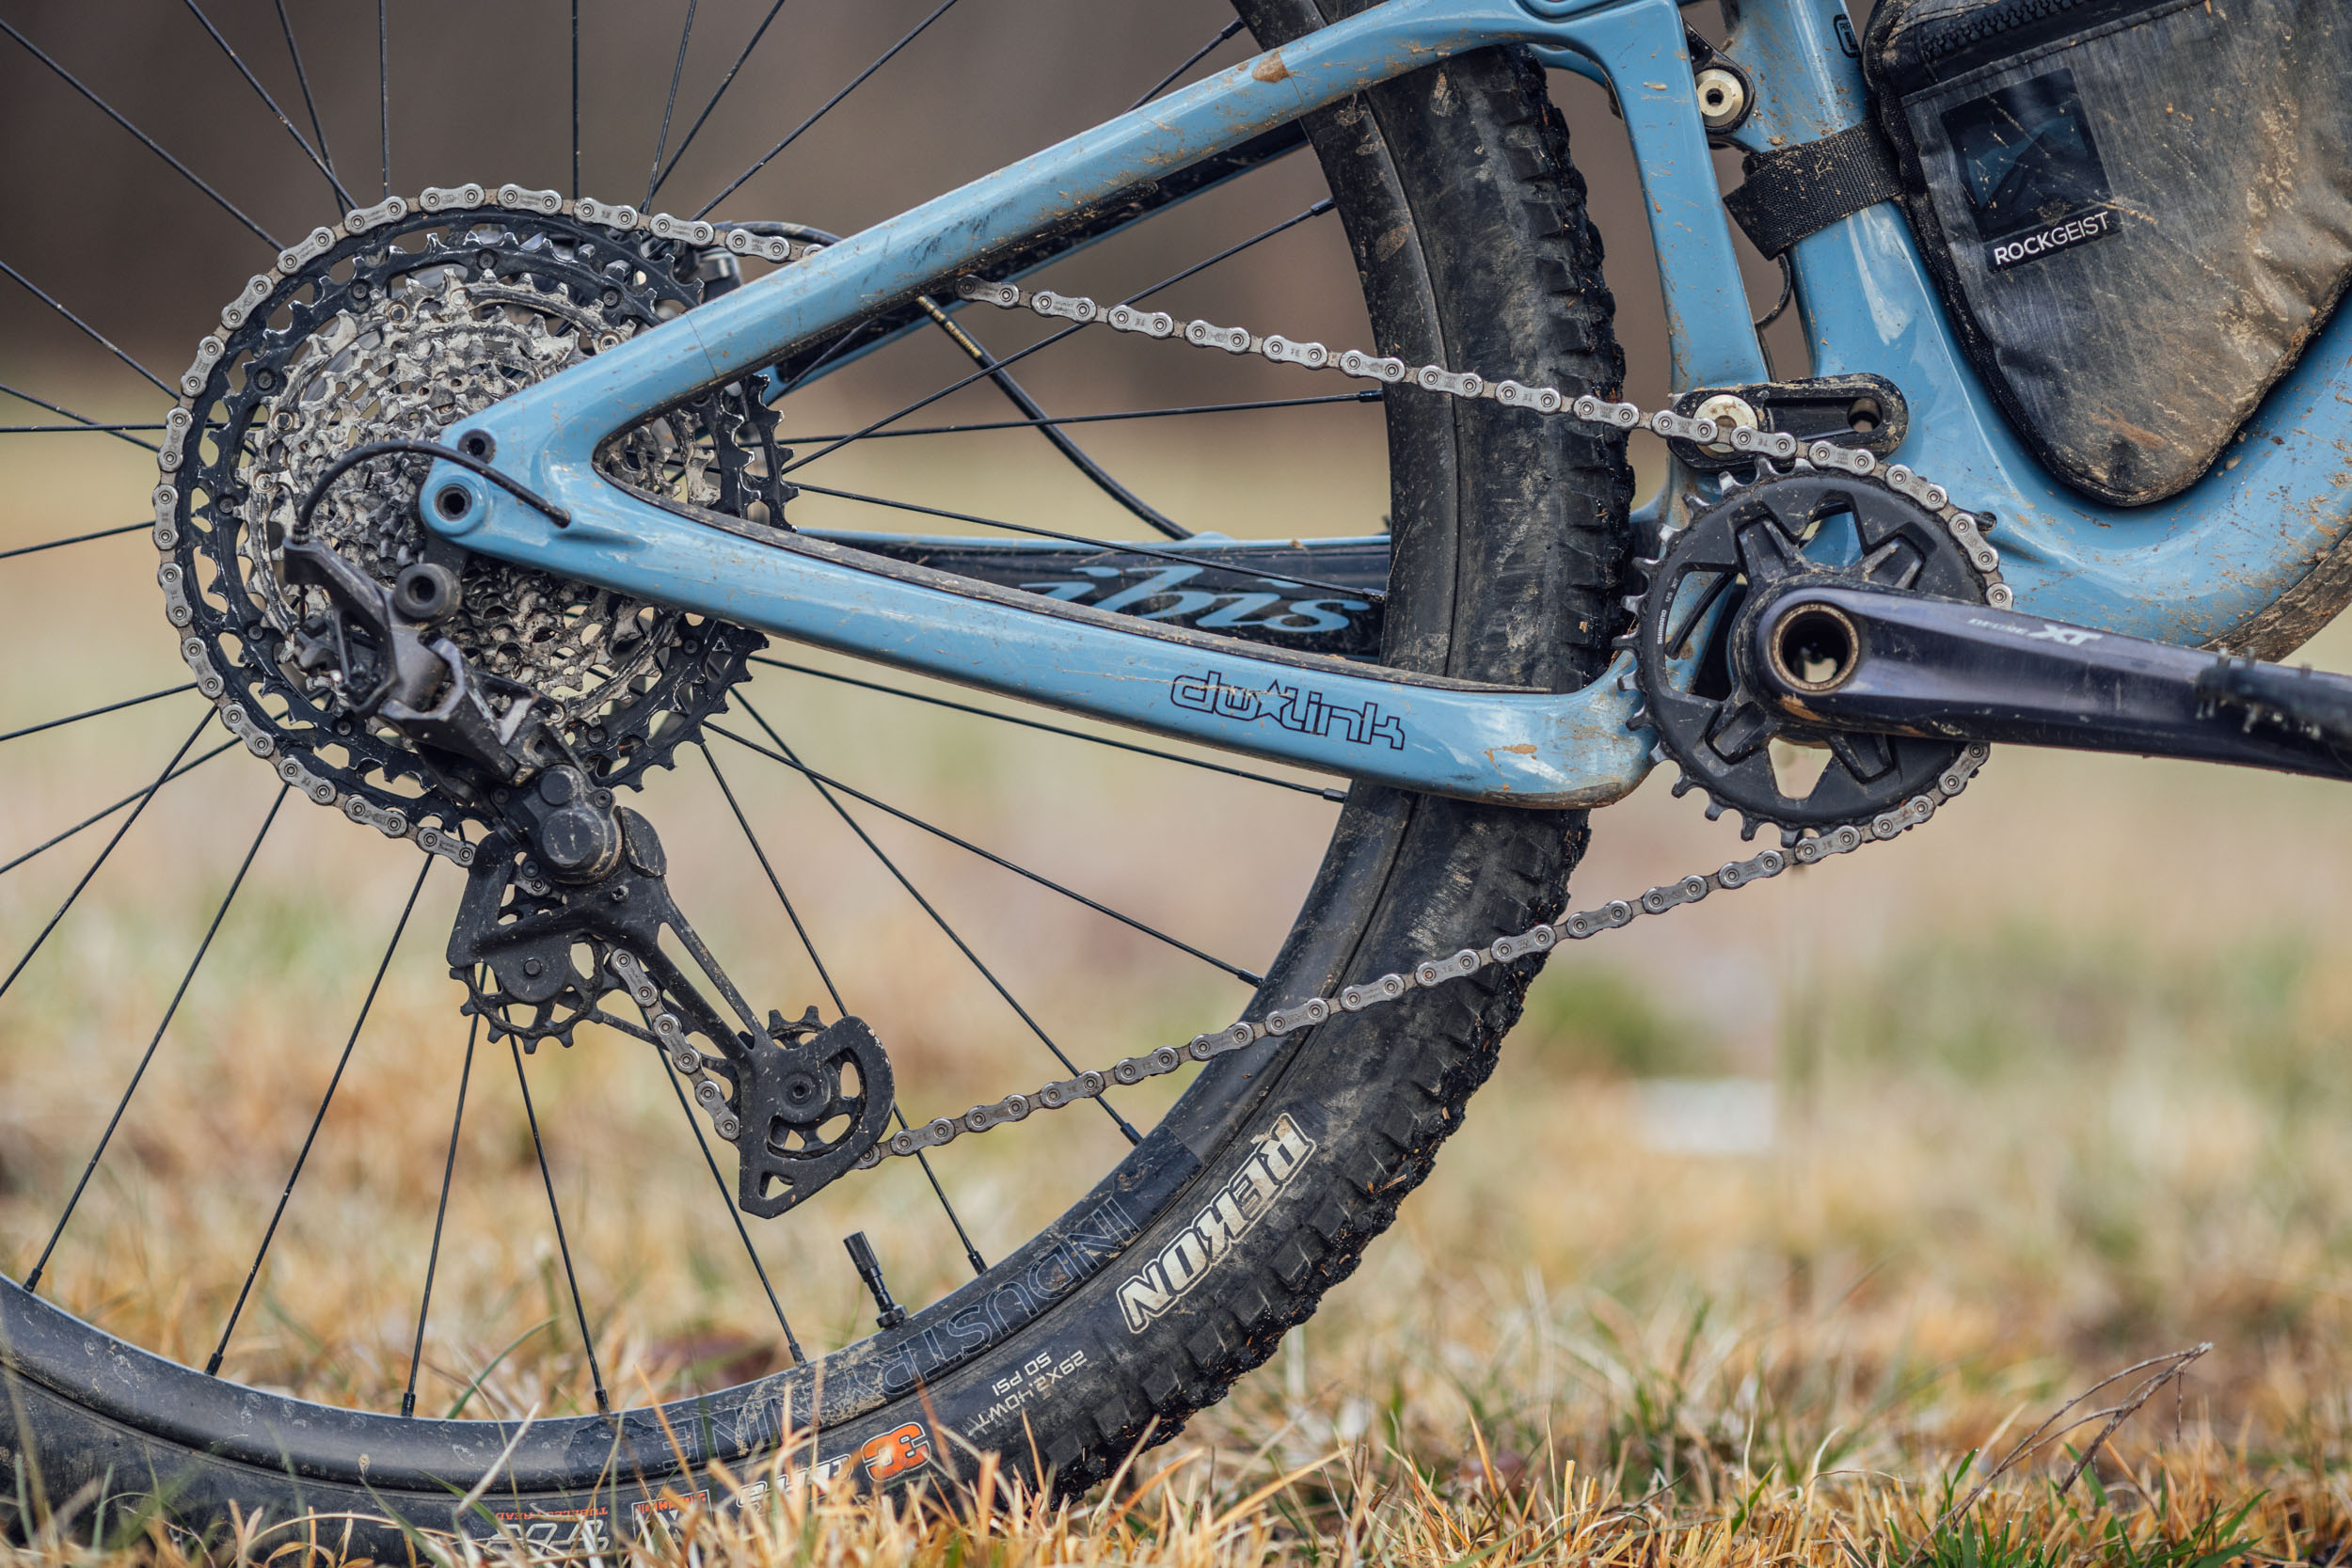 12-Speed Shimano XT Review: Lessons After Miles - BIKEPACKING.com